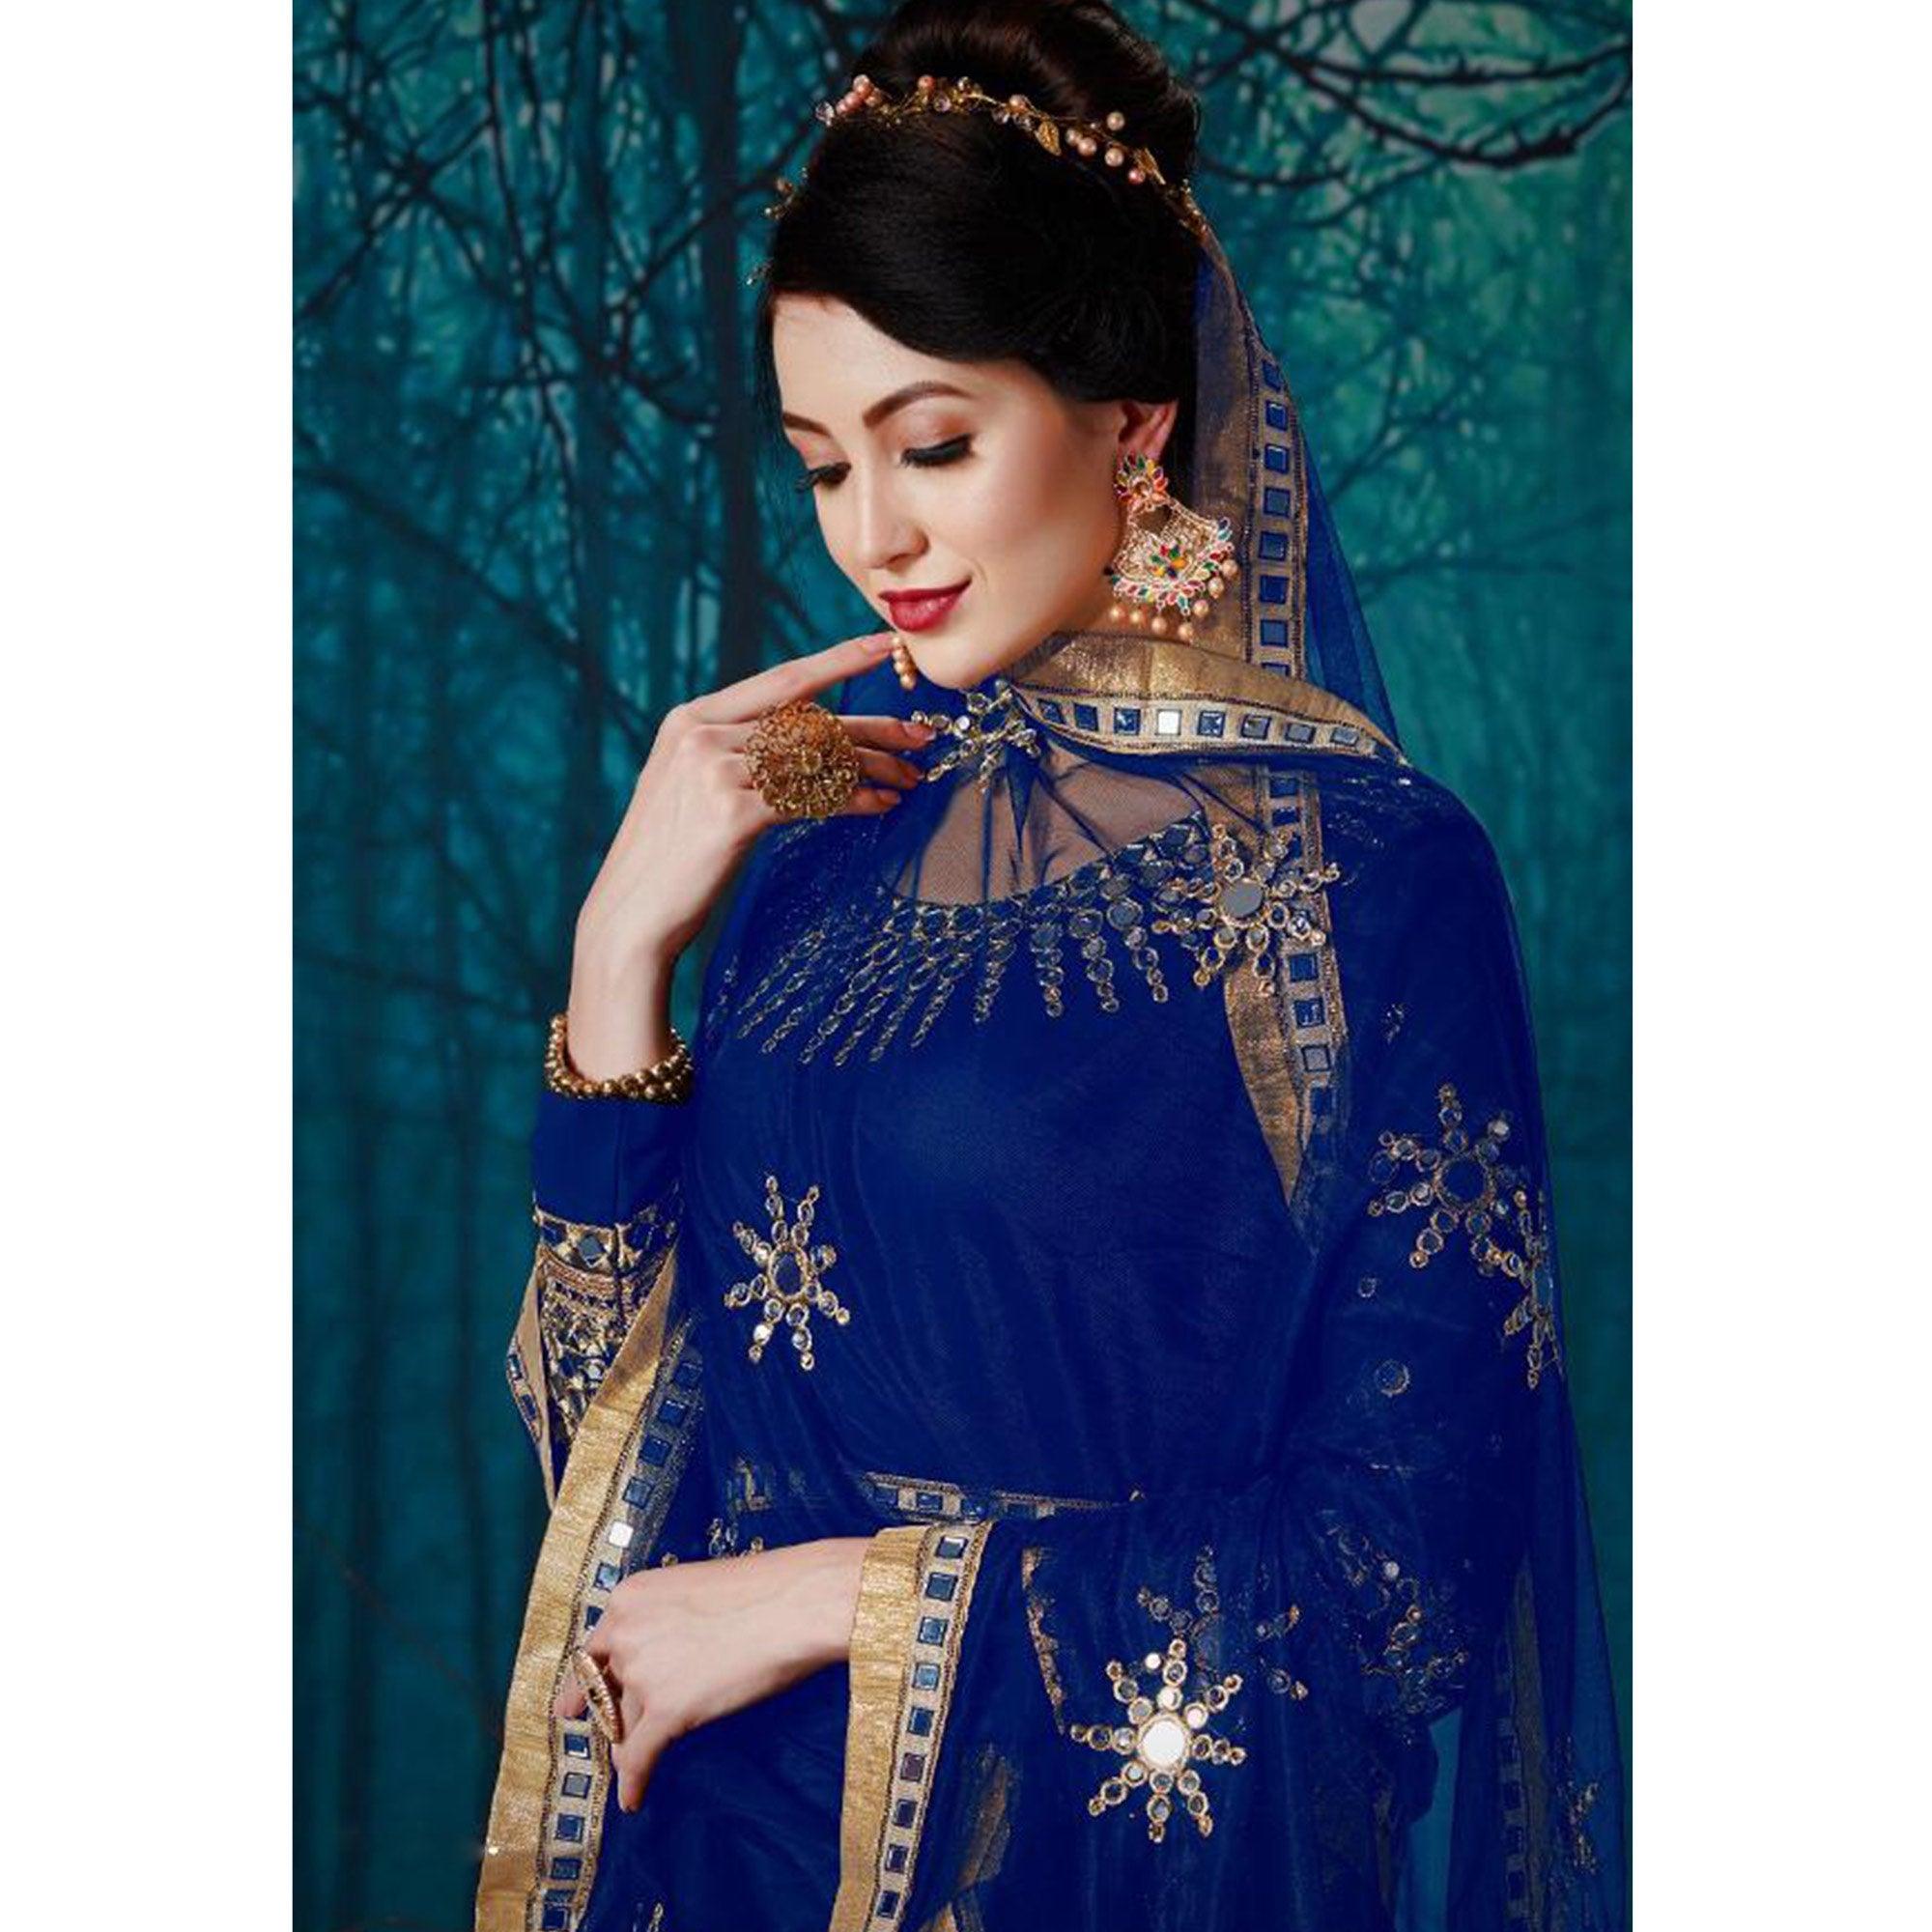 Entrancing Blue Colored Partywear Embroidered Georgette Anarkali Suit - Peachmode